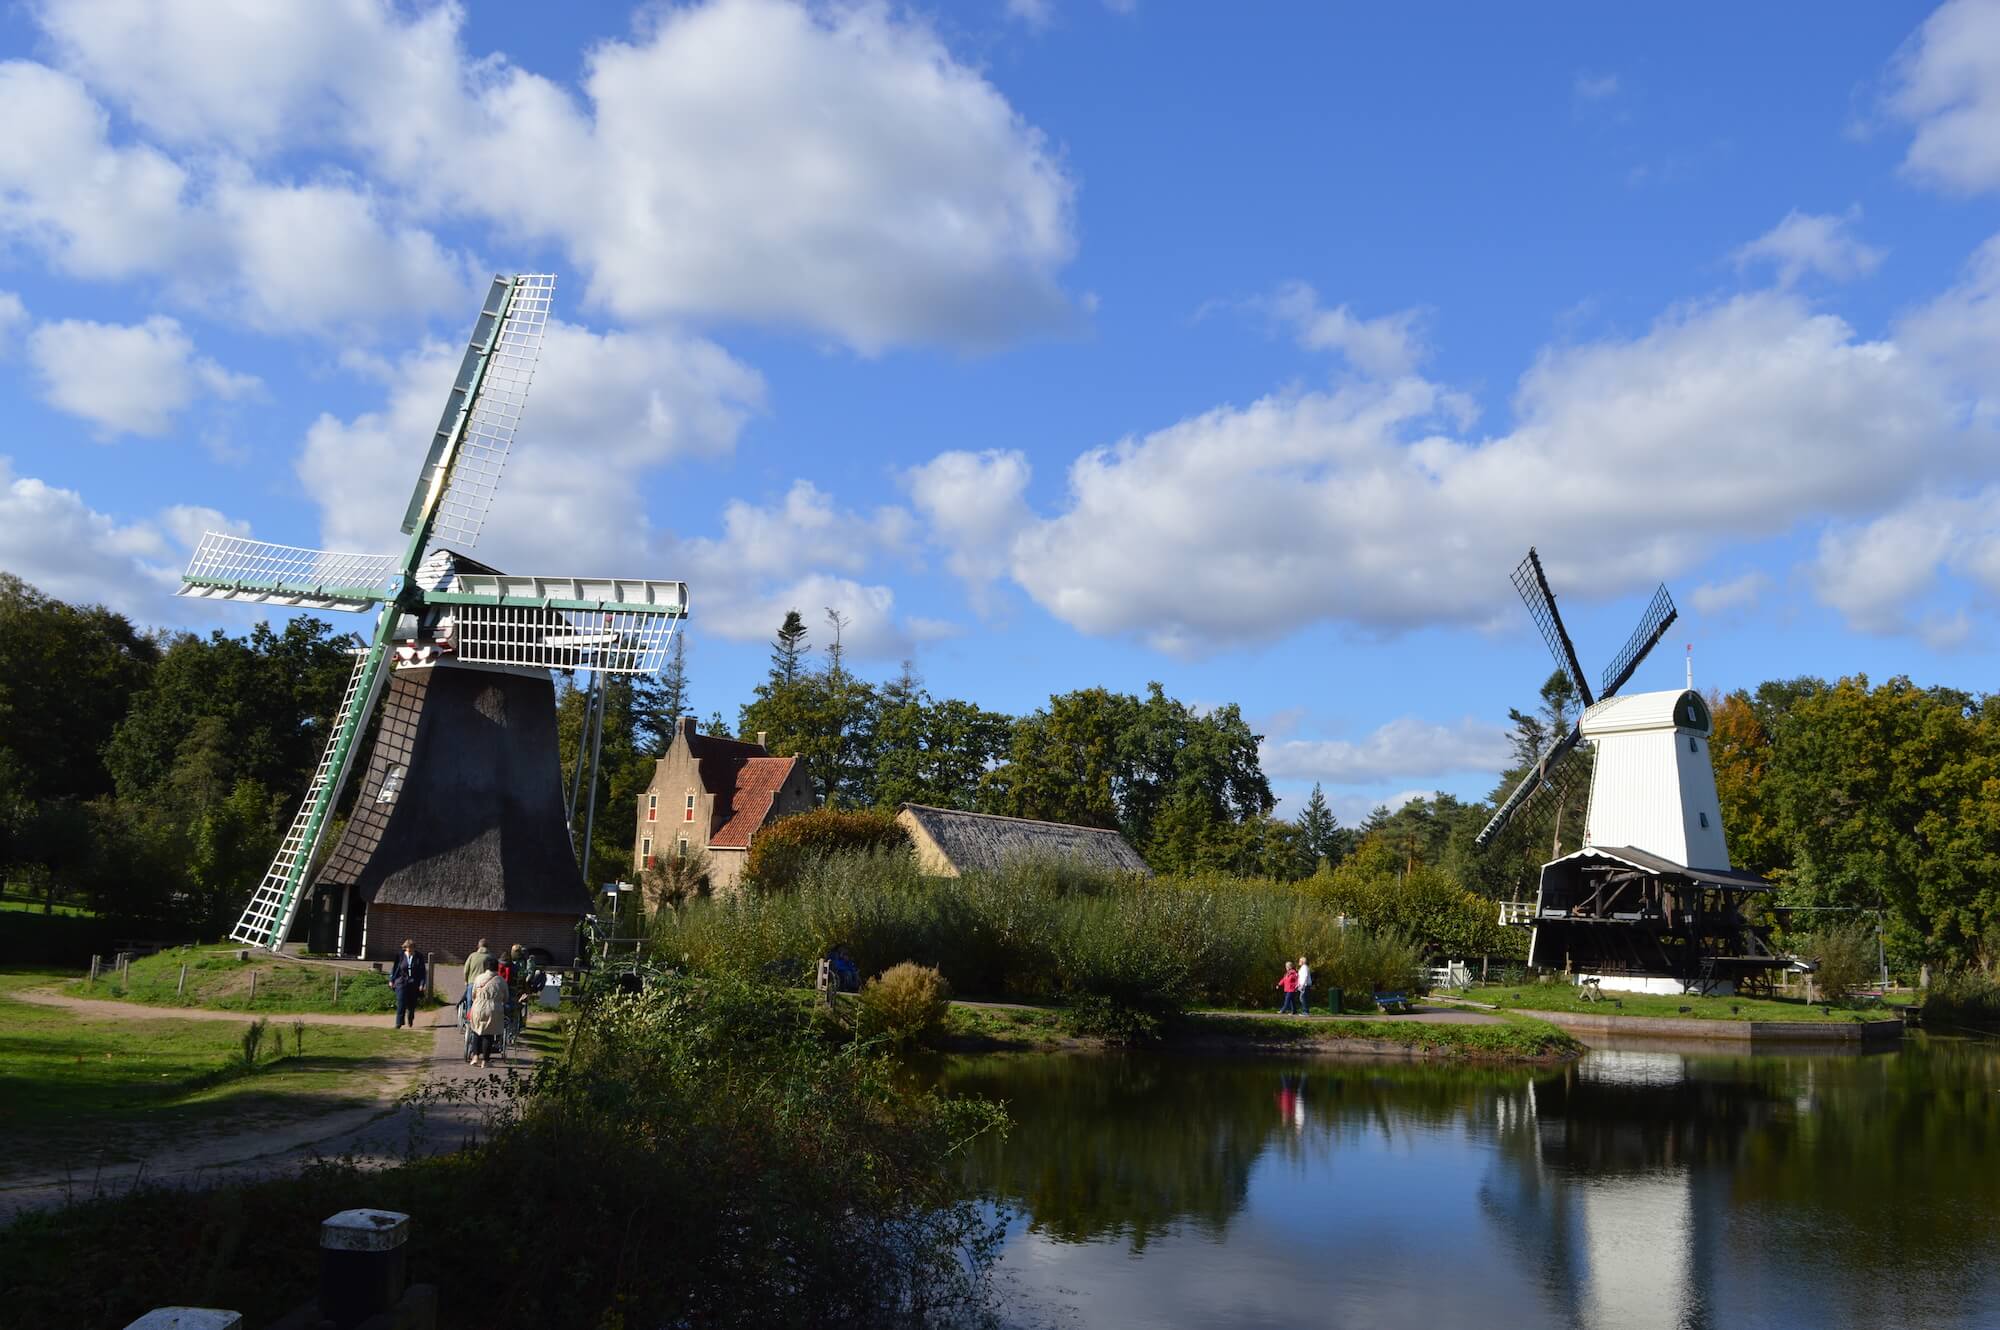 Landscape picture in the open air museum Arnhem, featuring multiple windmills and a blue sky with some small clouds.